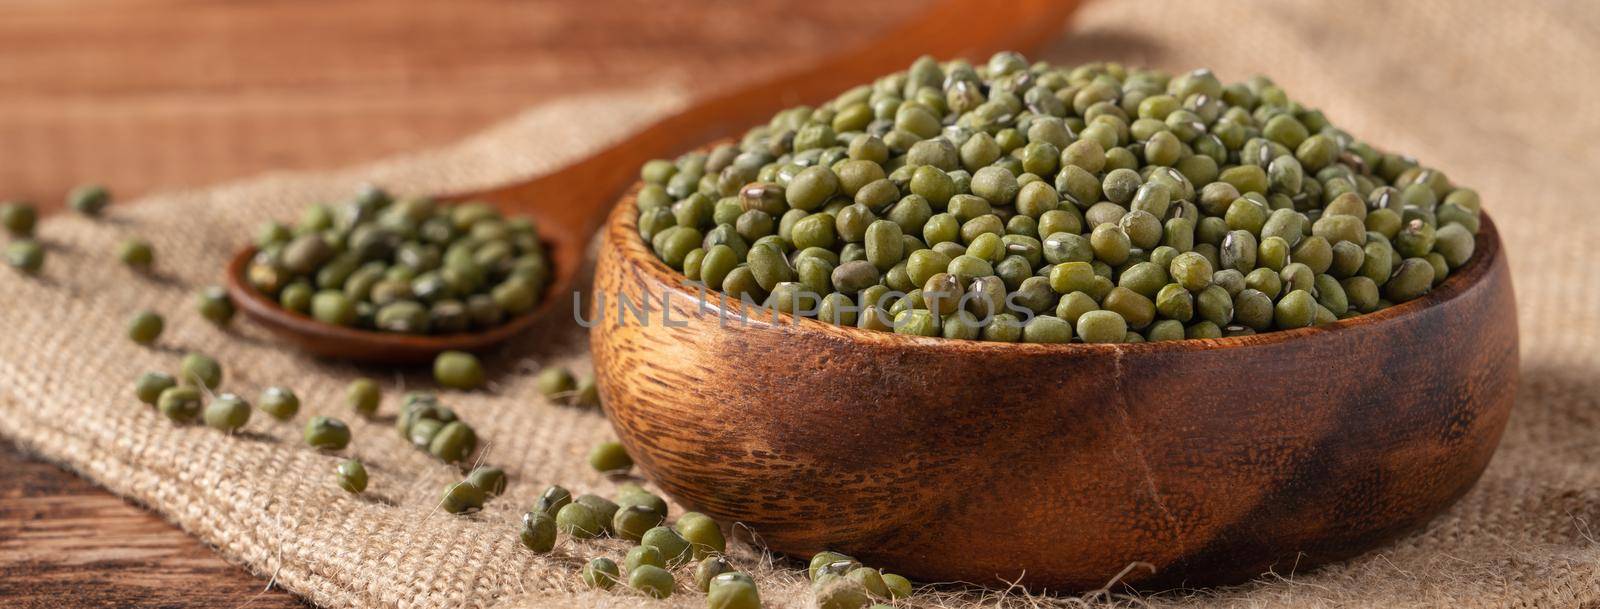 Close up of raw mung bean in a bowl on wooden table background.